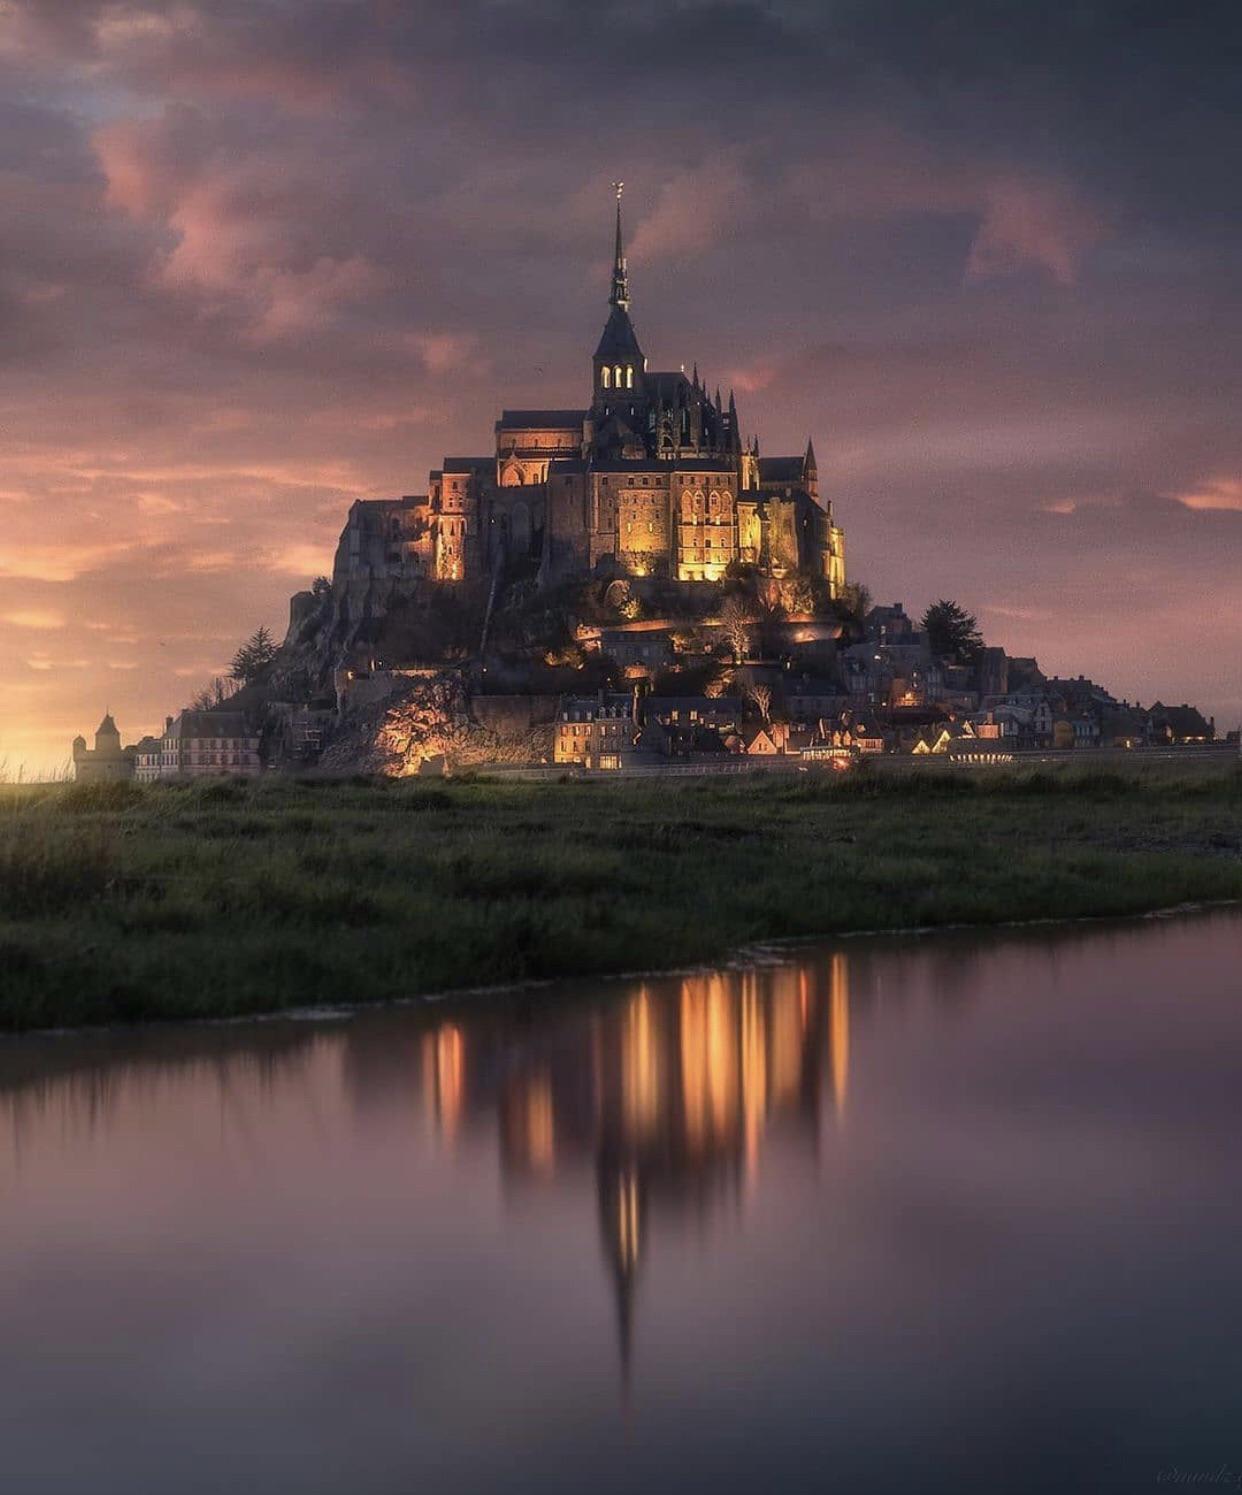 Mont Saint-Michel in France looks like the Disney logo In real life